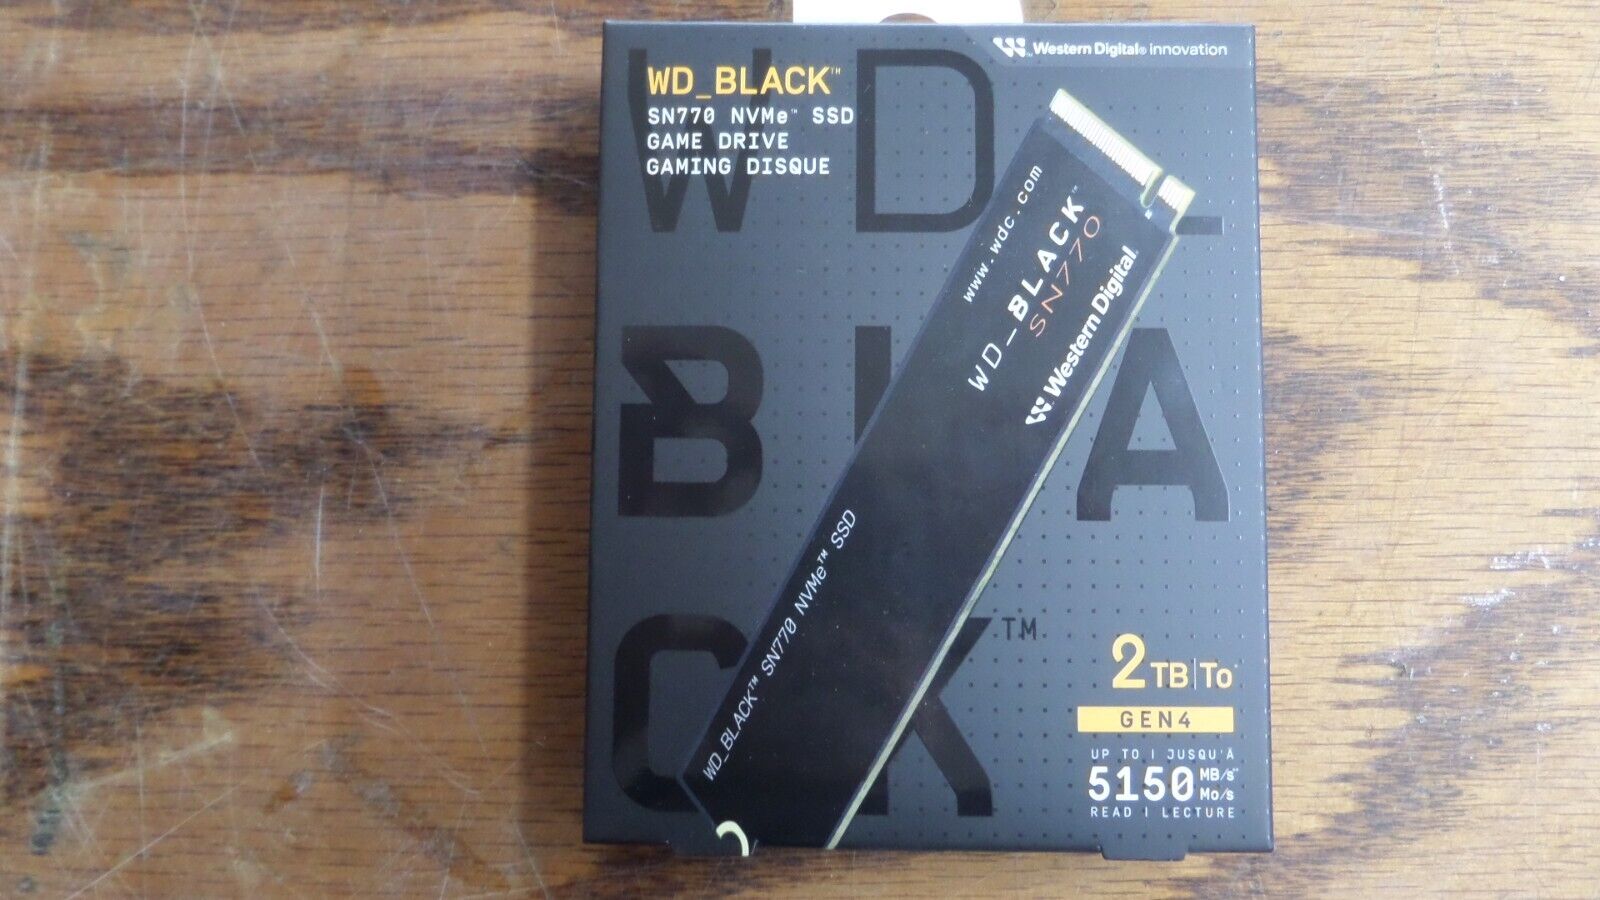 WD_BLACK 2TB SN770 NVMe Internal Gaming SSD Solid State Drives-Gen4